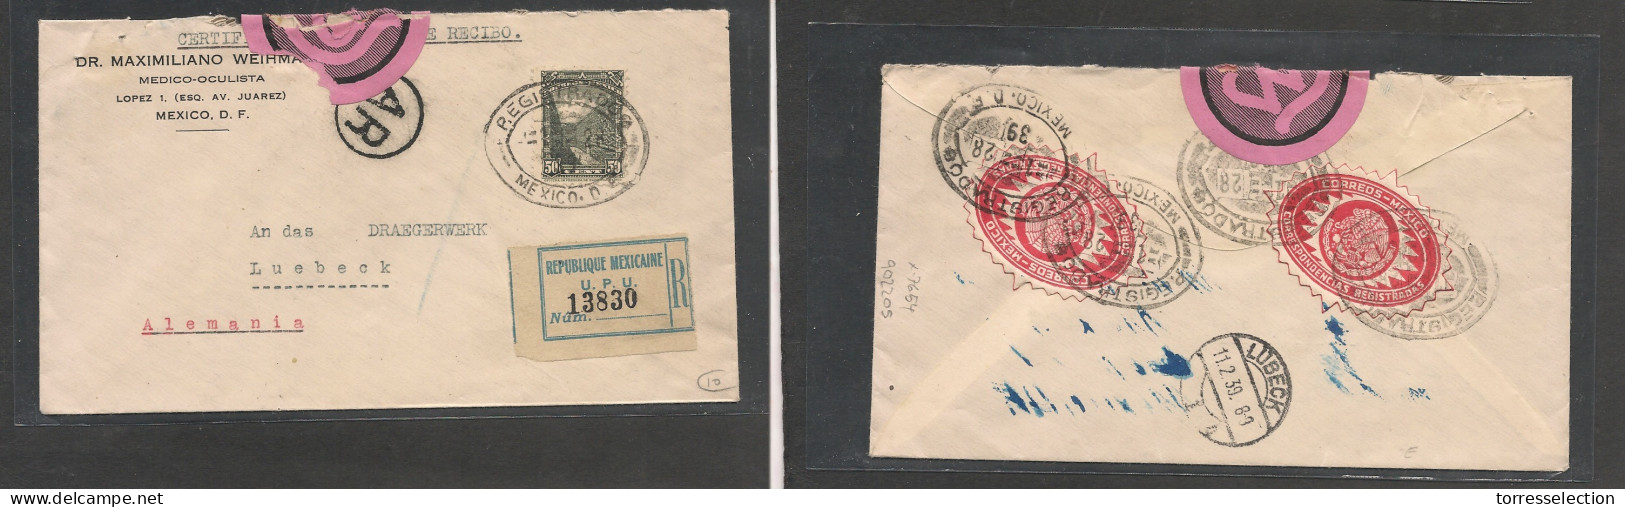 MEXICO. Mexico Cover - 1928 DF To Germany Lubeck Registered AR Single Fkd Env+ Resealed Label Transited Oftalmologist Bu - México